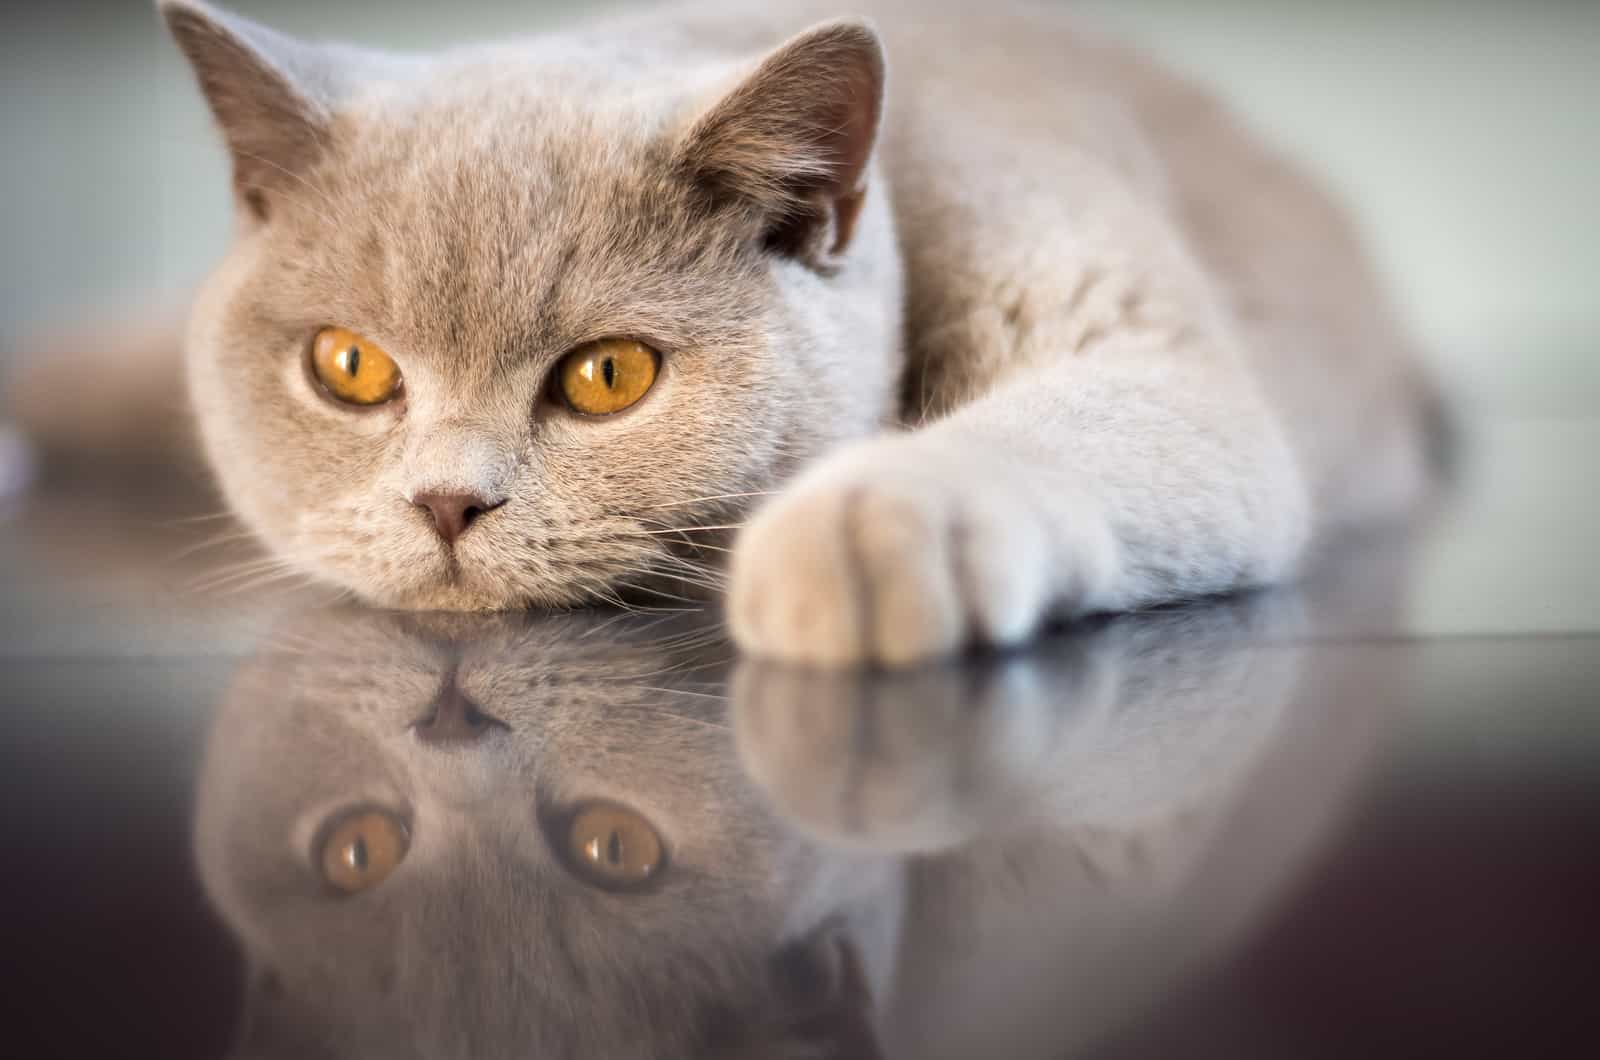 lilac British shorthair tom cat with yellow gold eyes daydreaming